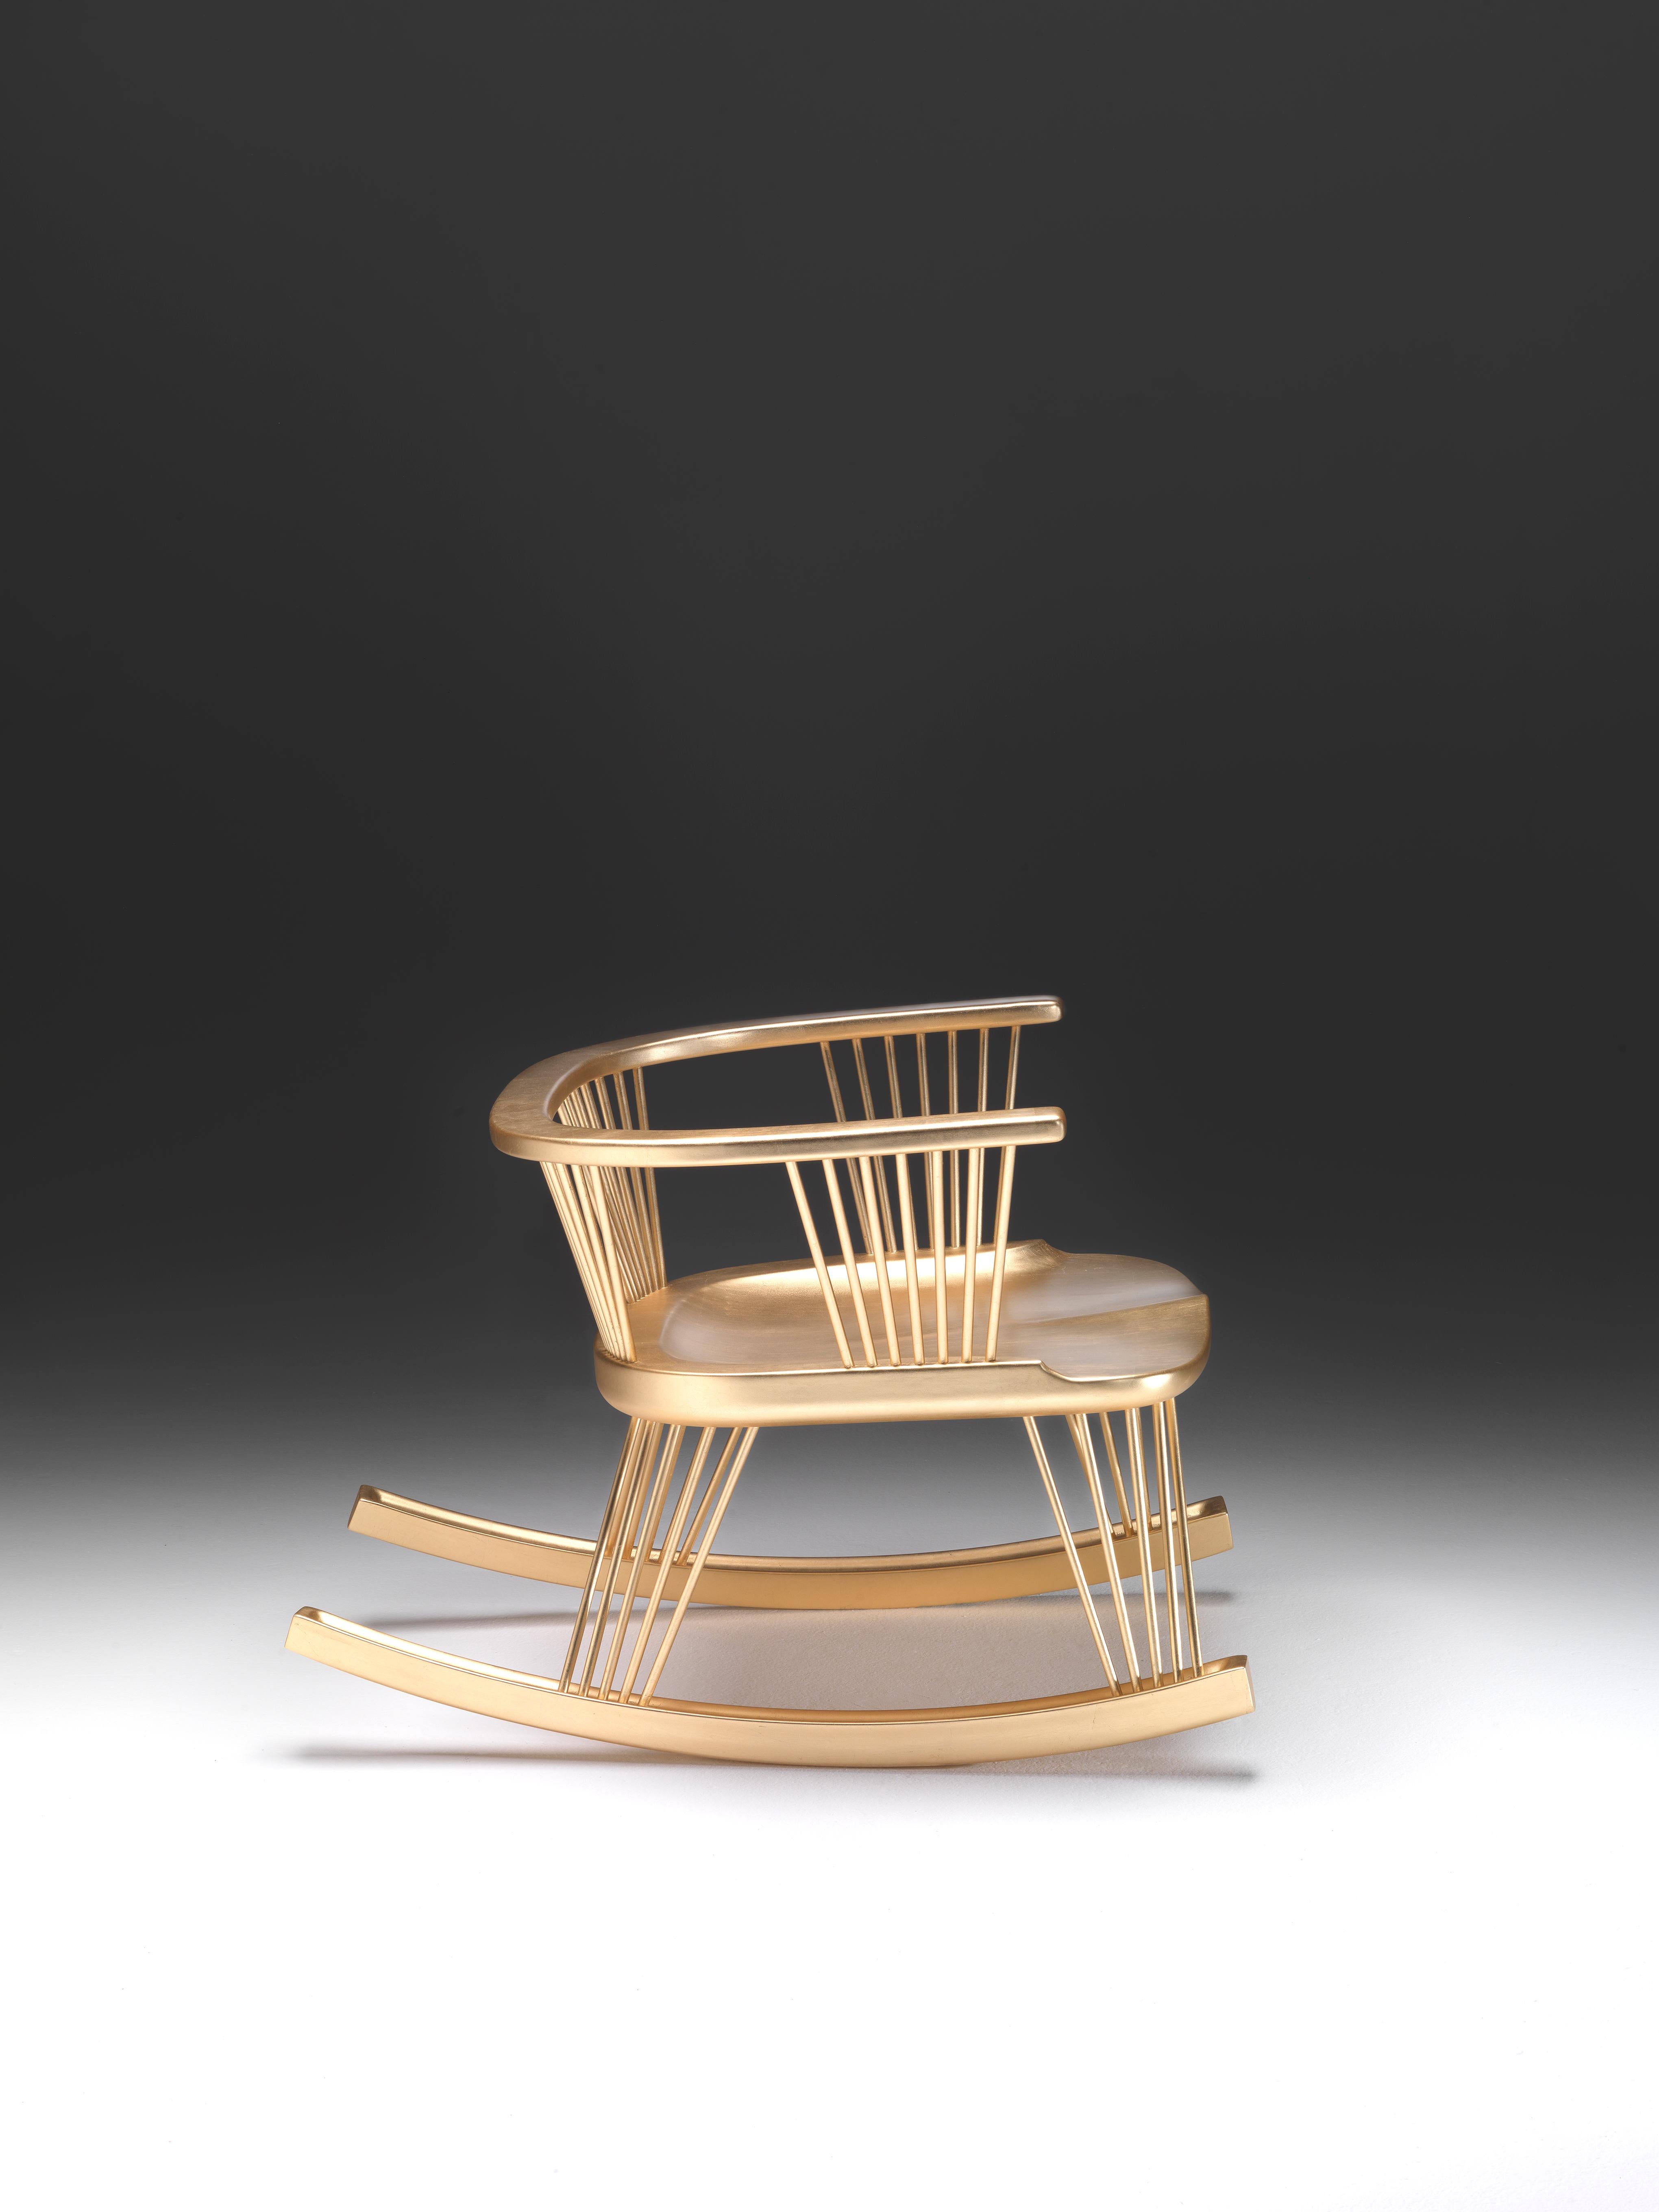 Italian SITLALI Low Rocking Chair in Solid Wood and Thin Overlapping Road and Gold Leaf For Sale